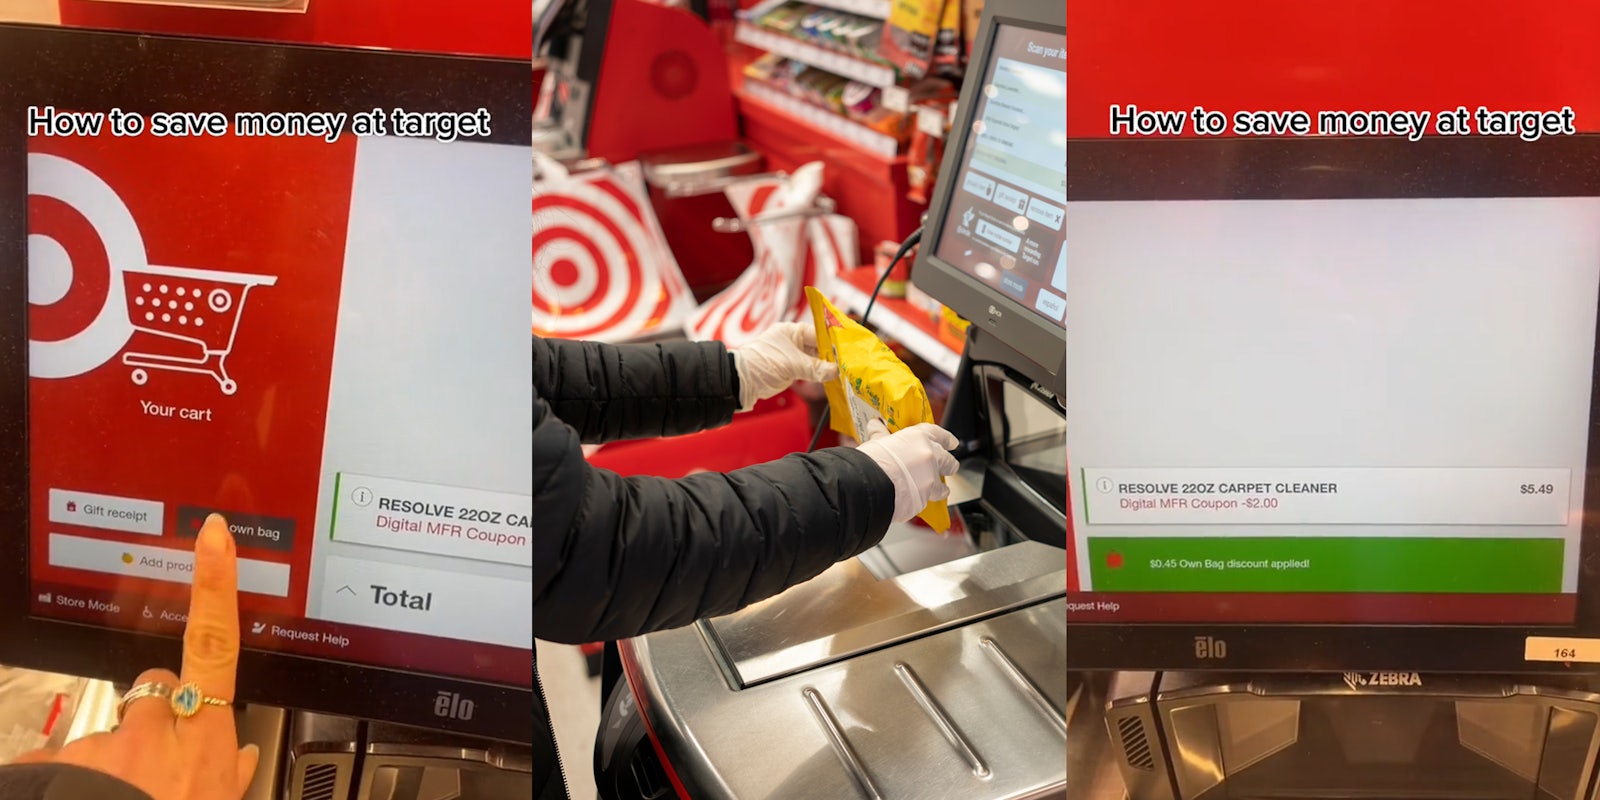 finger pressing 'my own bag' option on Target self-checkout screen with caption 'How to save money at target' (l) person scanning item at Target self-checkout (c) Own Bag discount added on Target self-checkout screen with caption 'How to save money at target' (r)